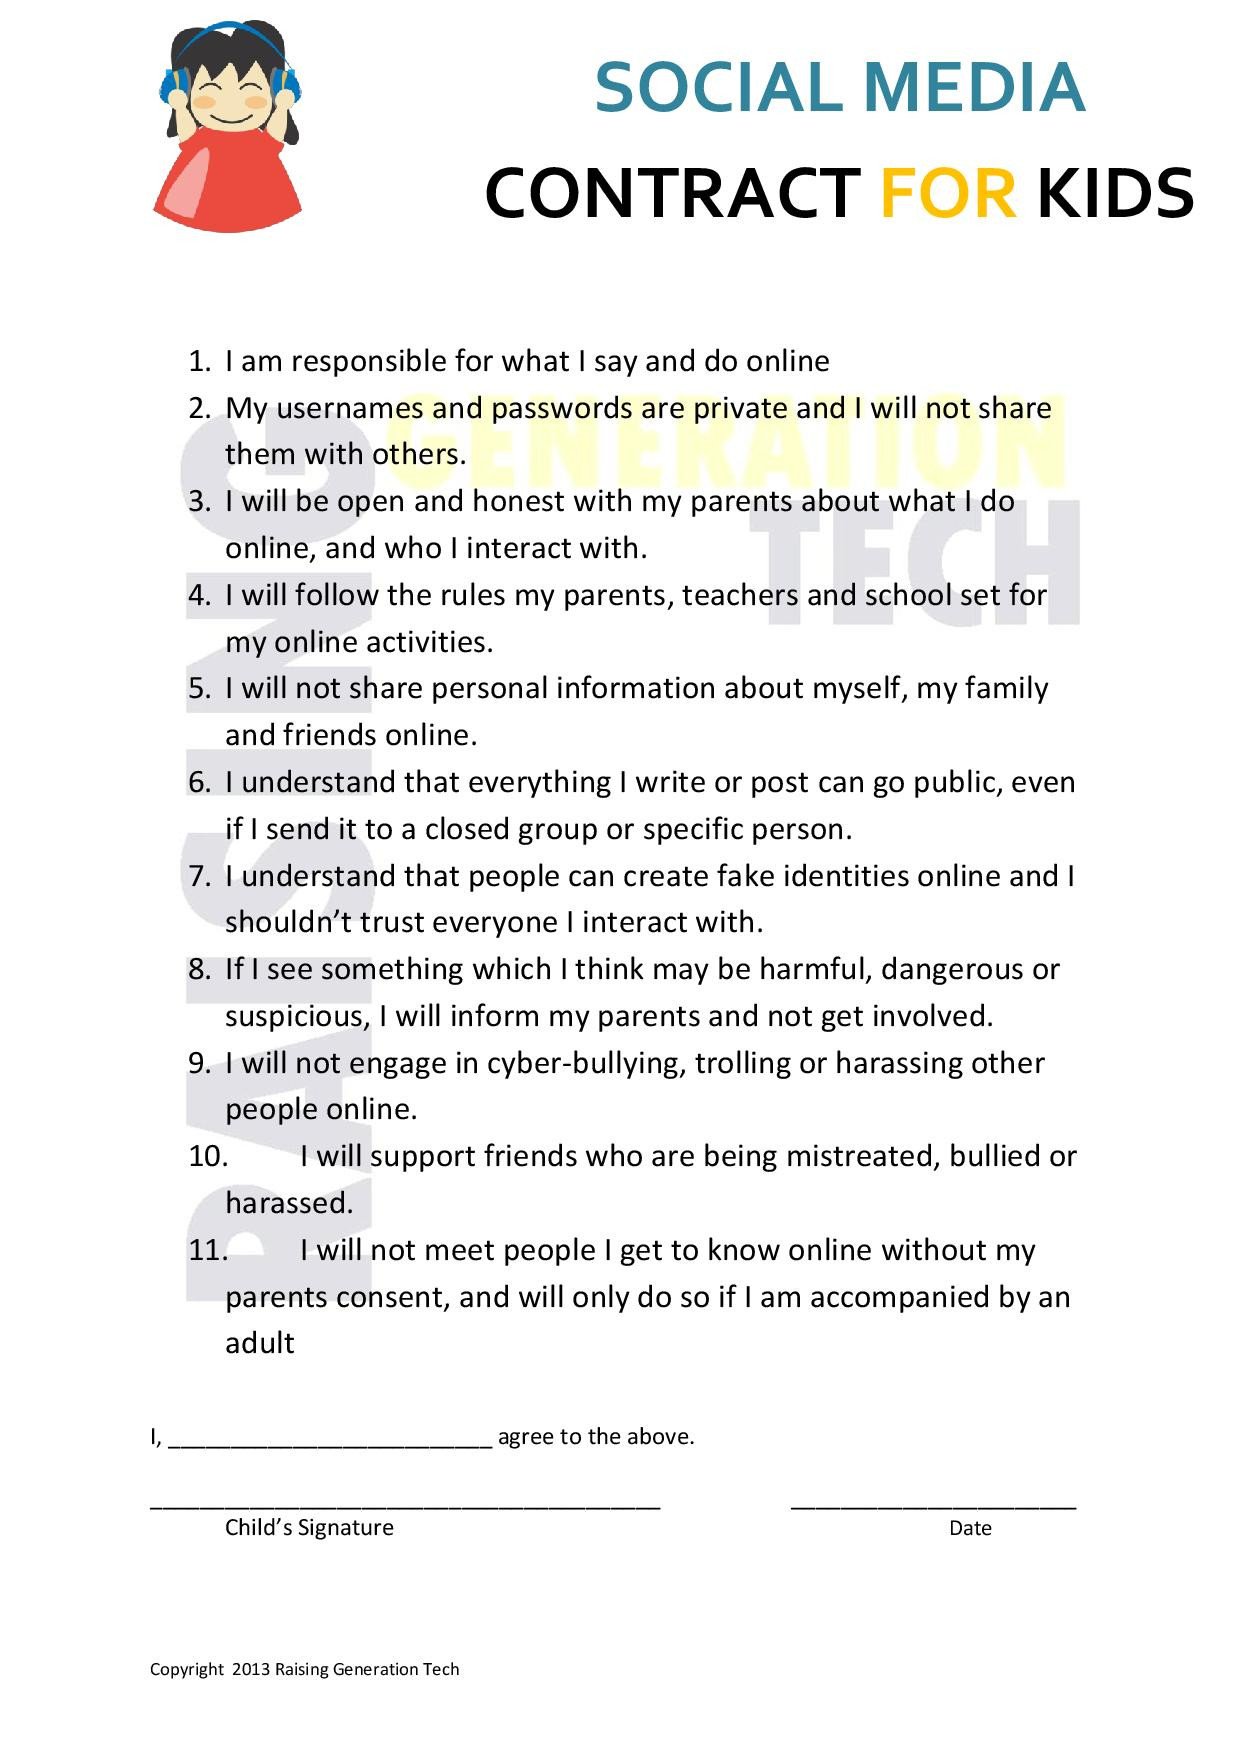 Social Media Contracts for Kids